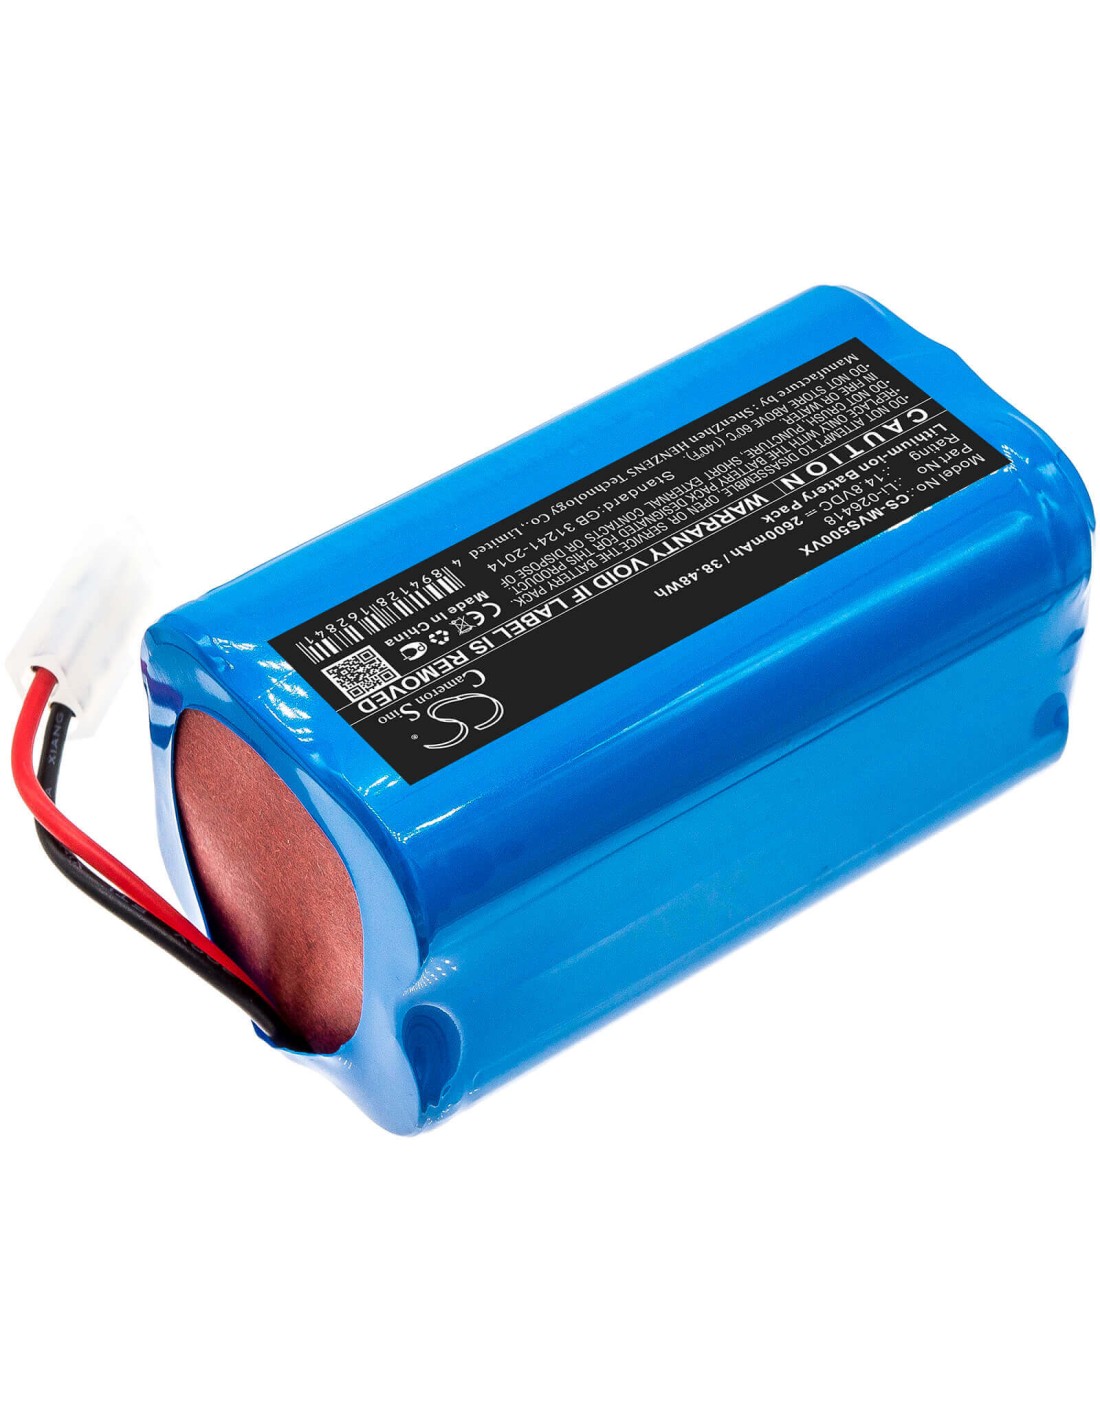 Battery for Myvacbot, Sn500 14.8V, 2600mAh - 38.48Wh